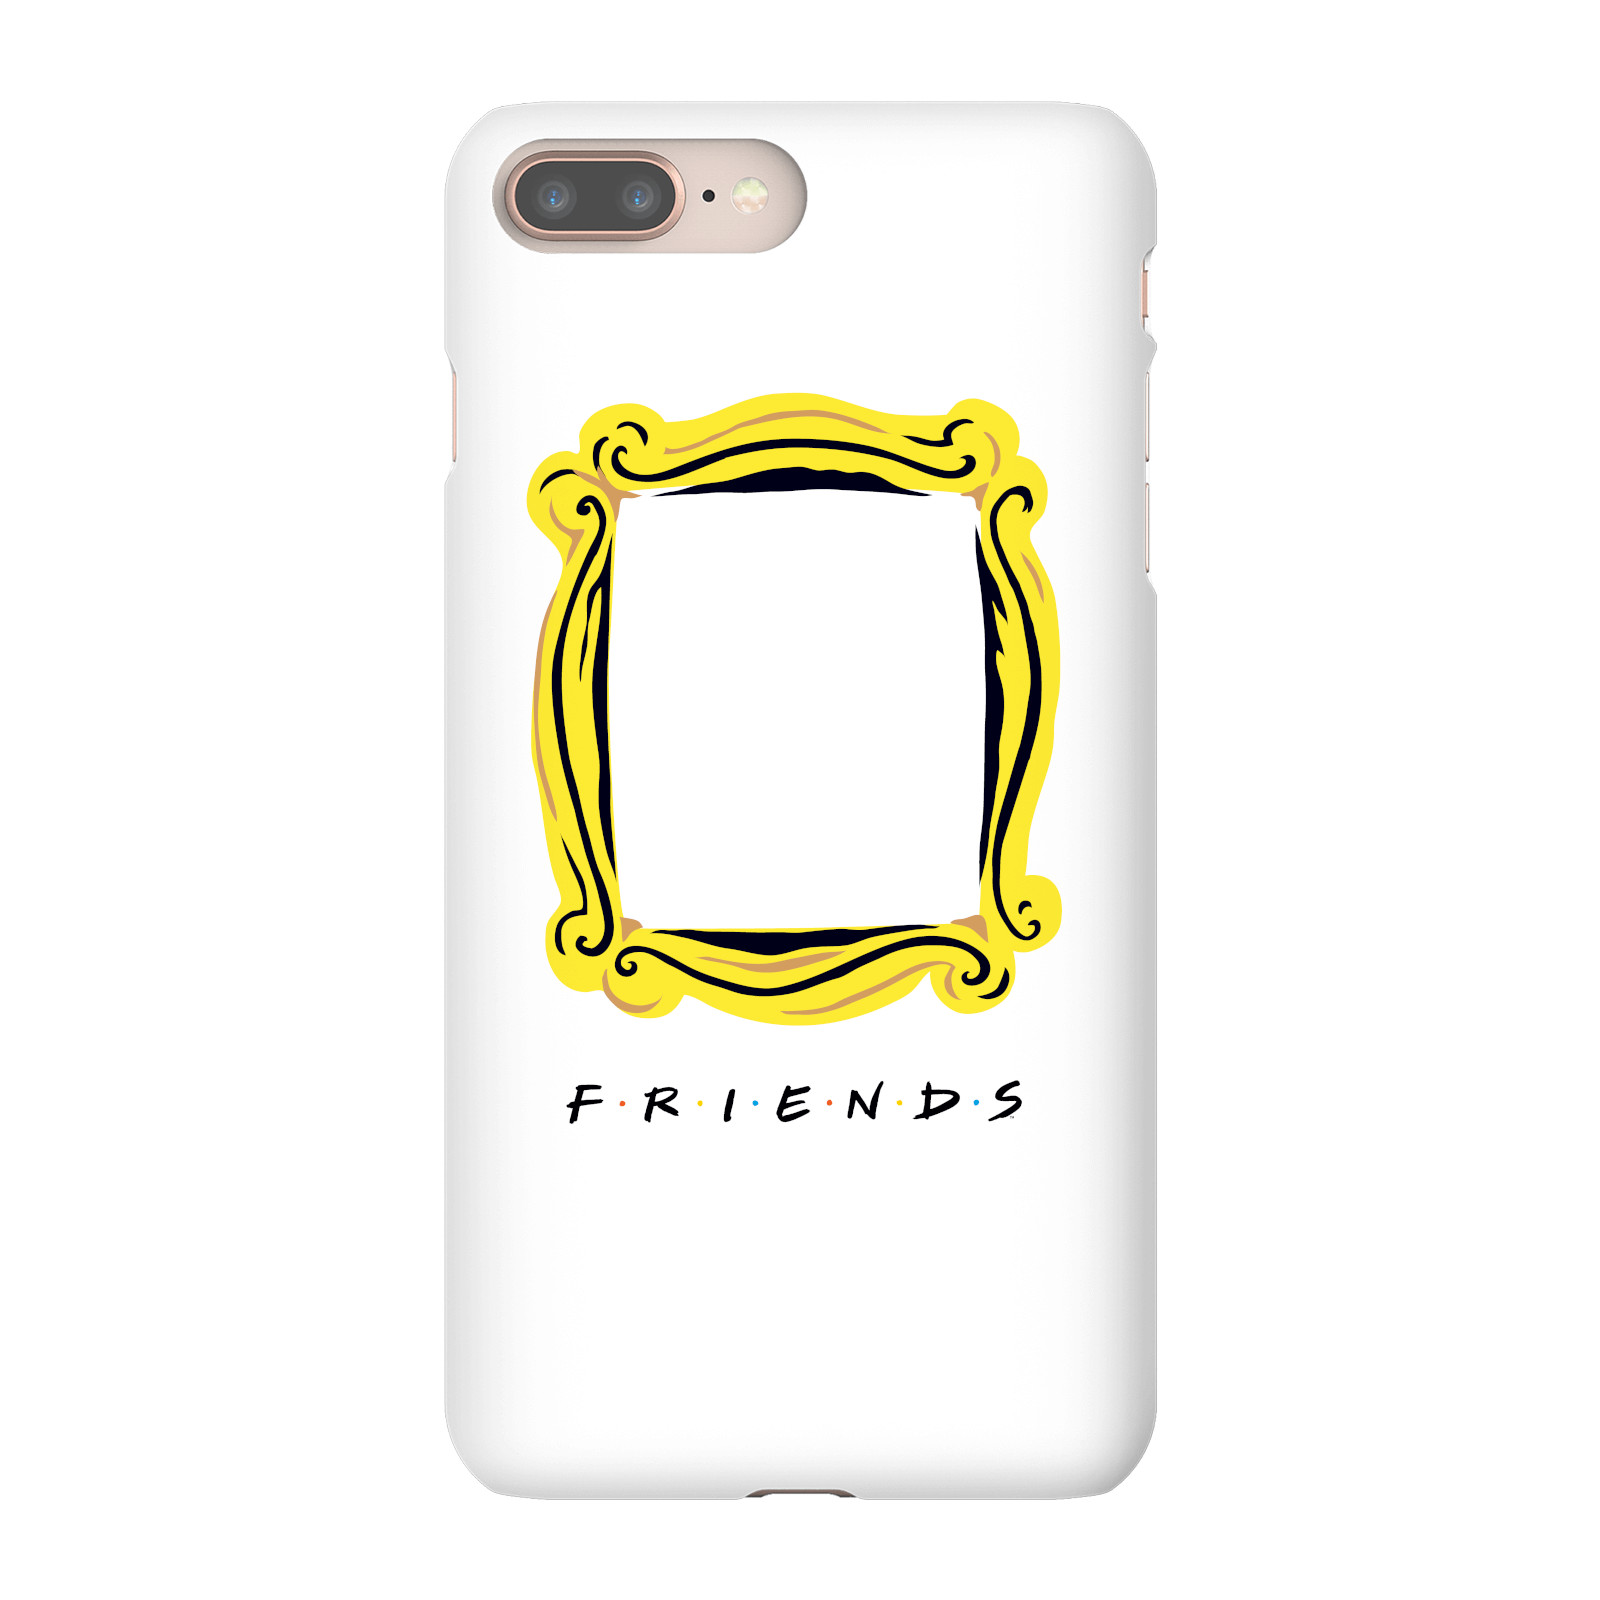 Photos - Case Frame Friends  Phone  for iPhone and Android - iPhone X - Snap  - G 